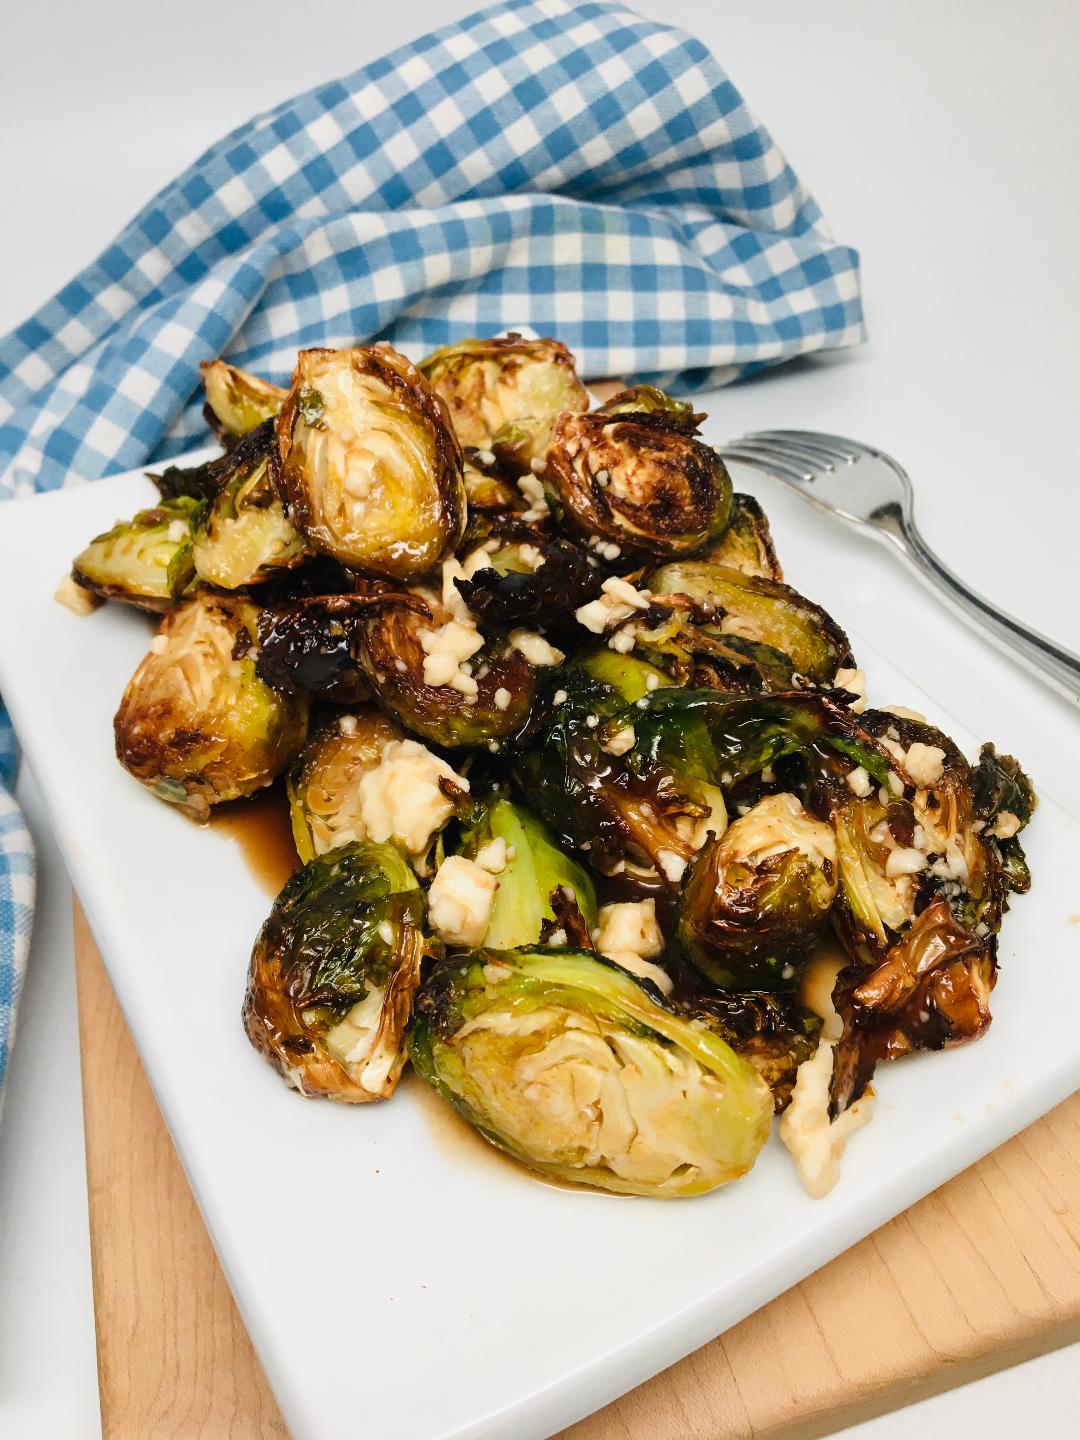 Air-Fried Brussels Sprouts With Balsamic-Honey Glaze and Feta